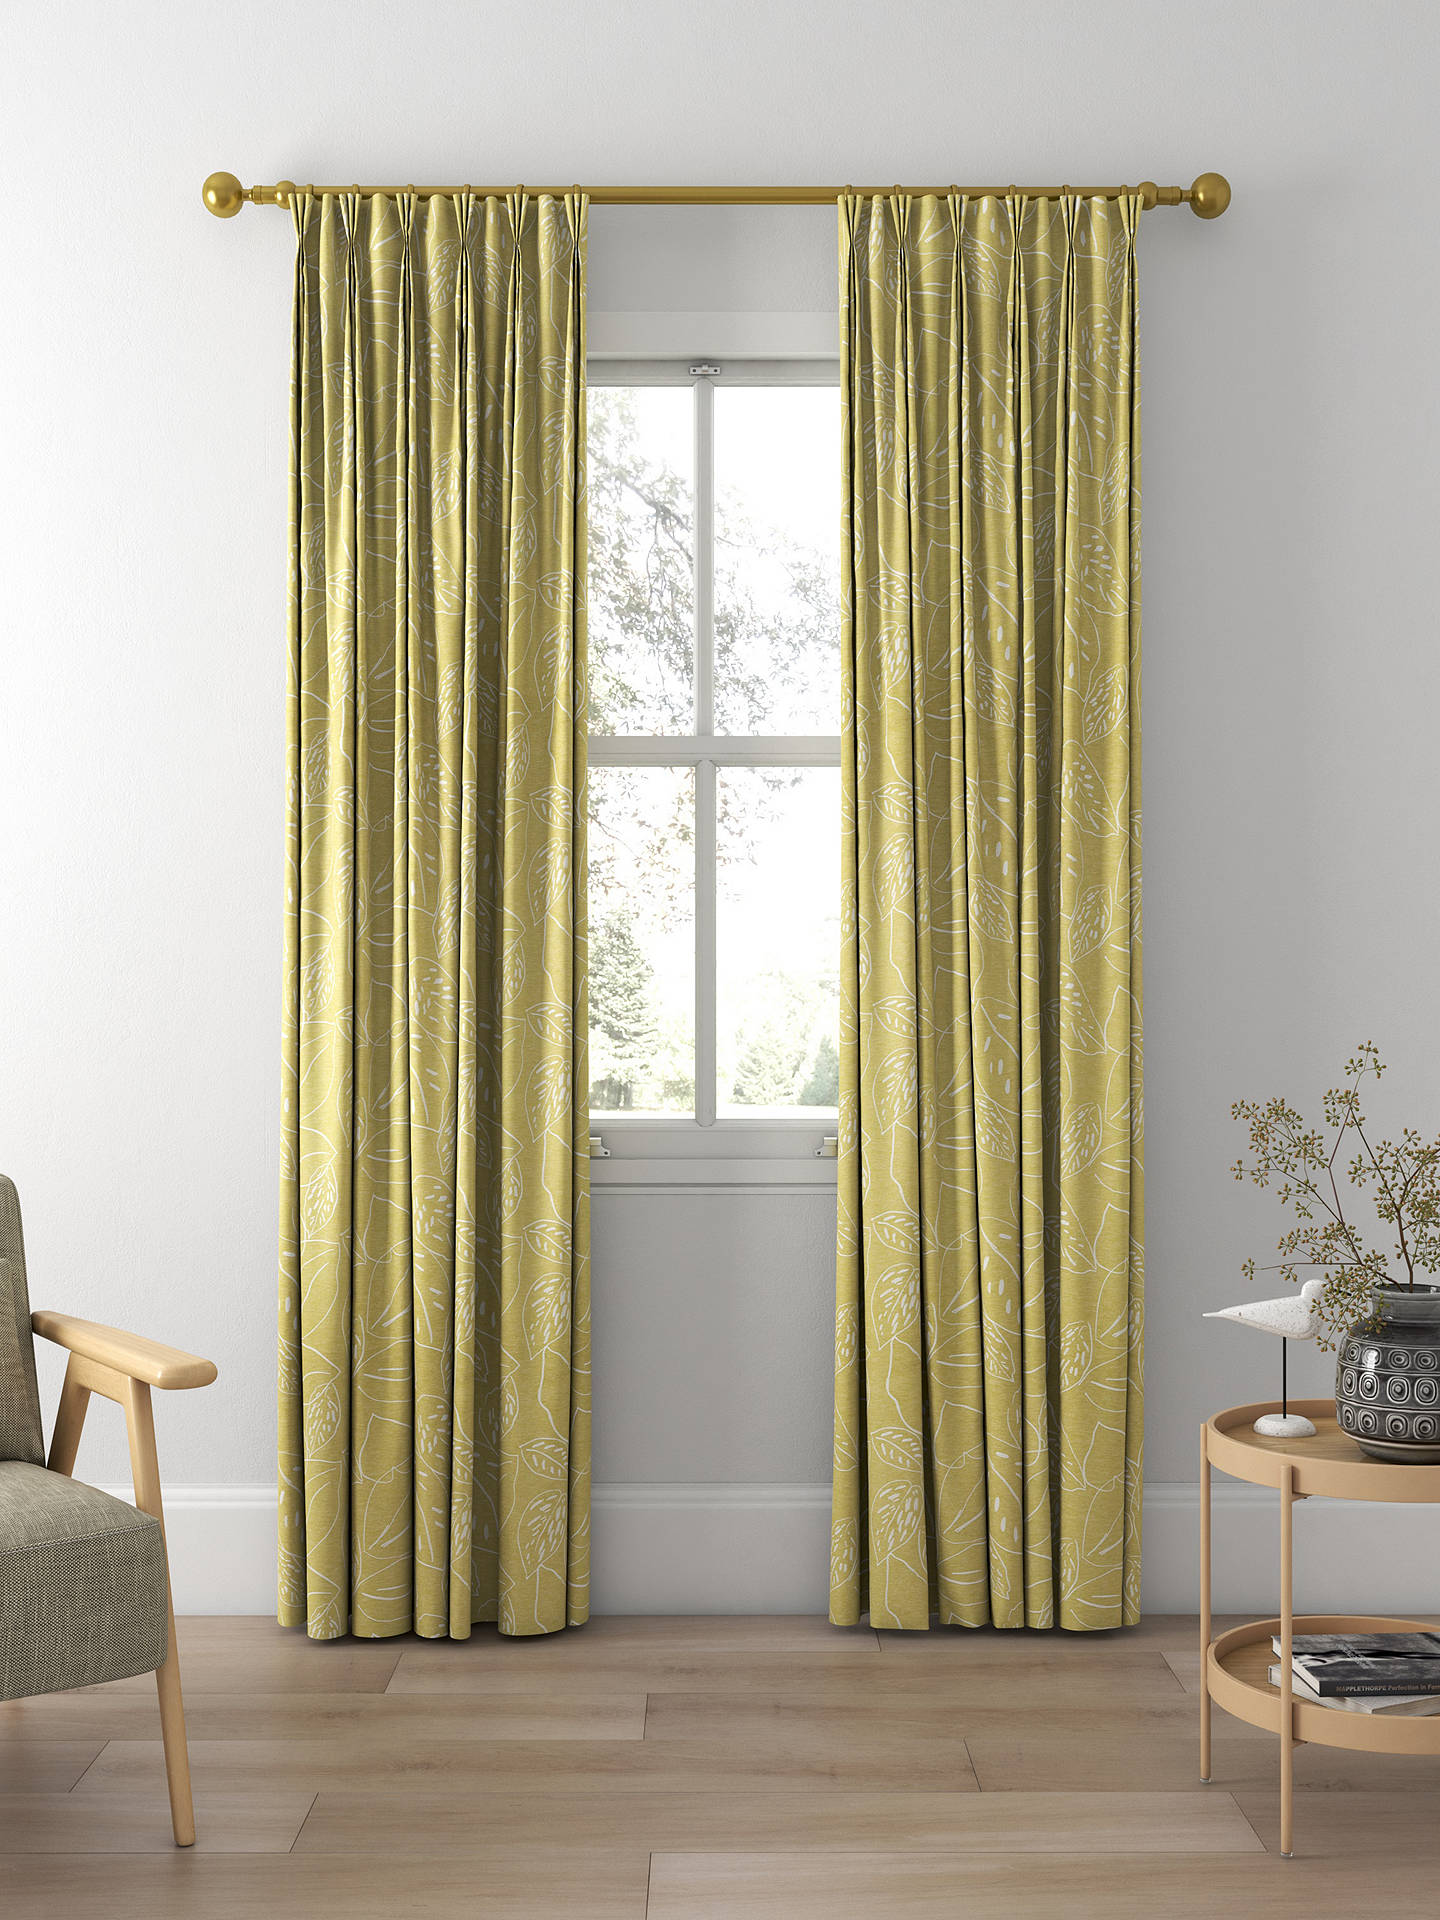 Scion Orto Made to Measure Curtains, Lime